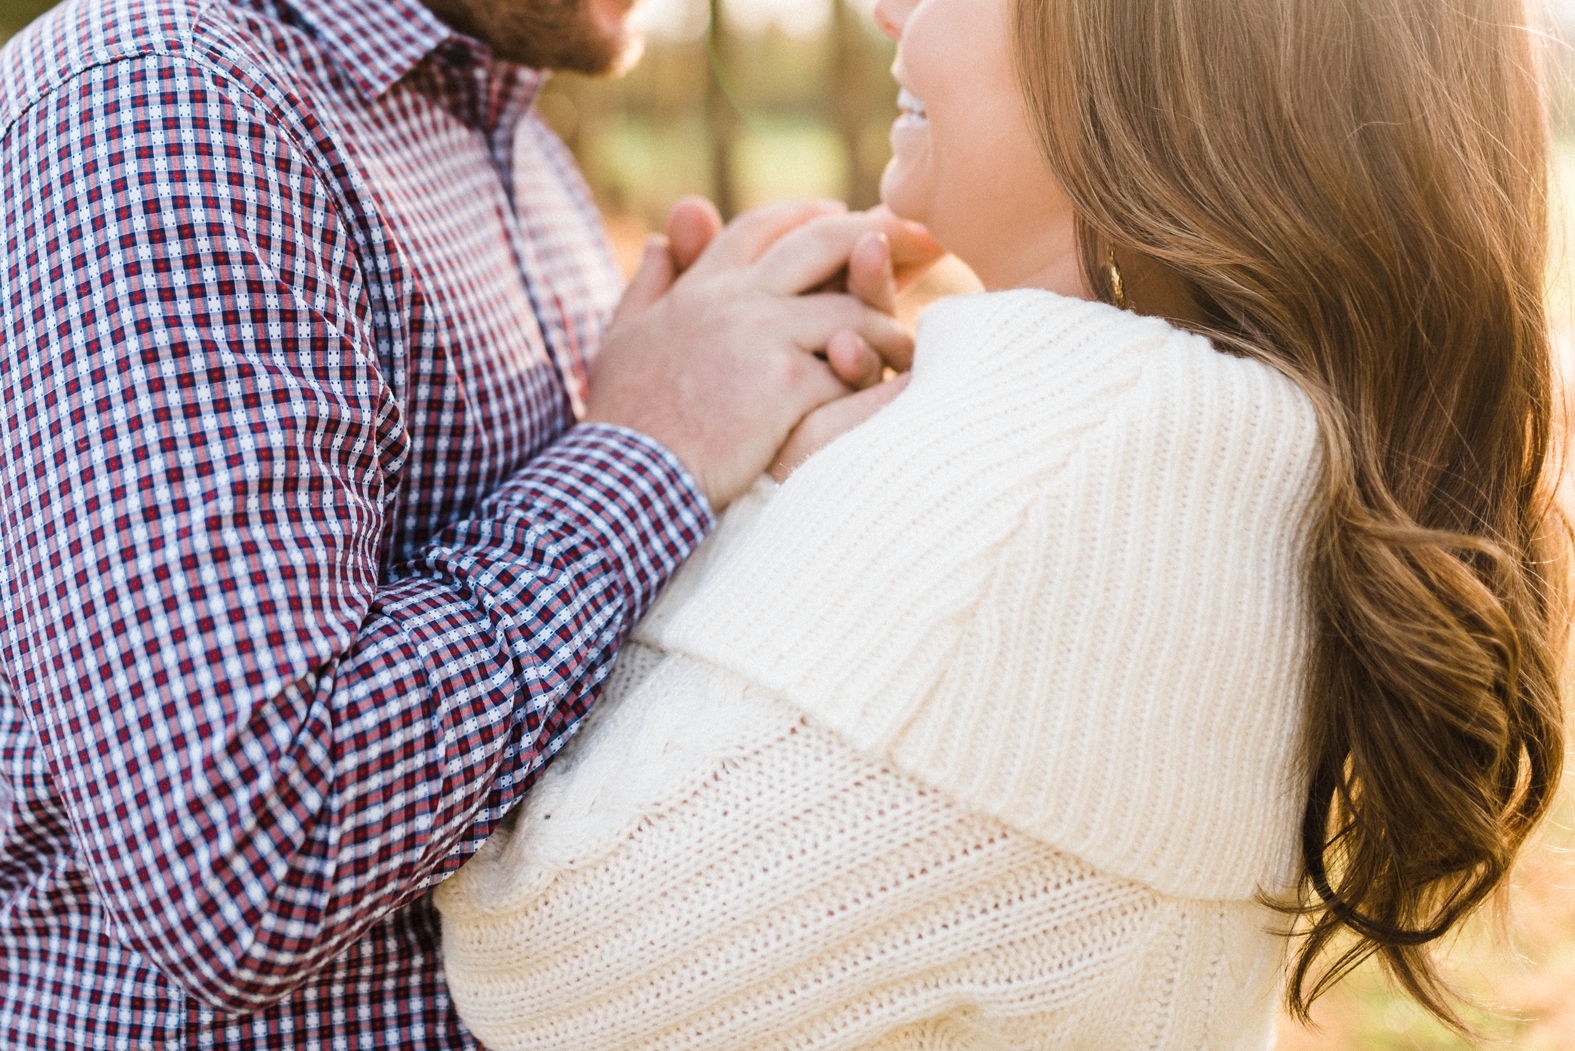 Downtown St. Louis,Engagement Photography,Real Engagement,St. Louis Arch Engagement,St. Louis Engagement,Stl engagement,WInter Engagement,city garden,manda renee,peabody,st-louis-wedding-photographer,